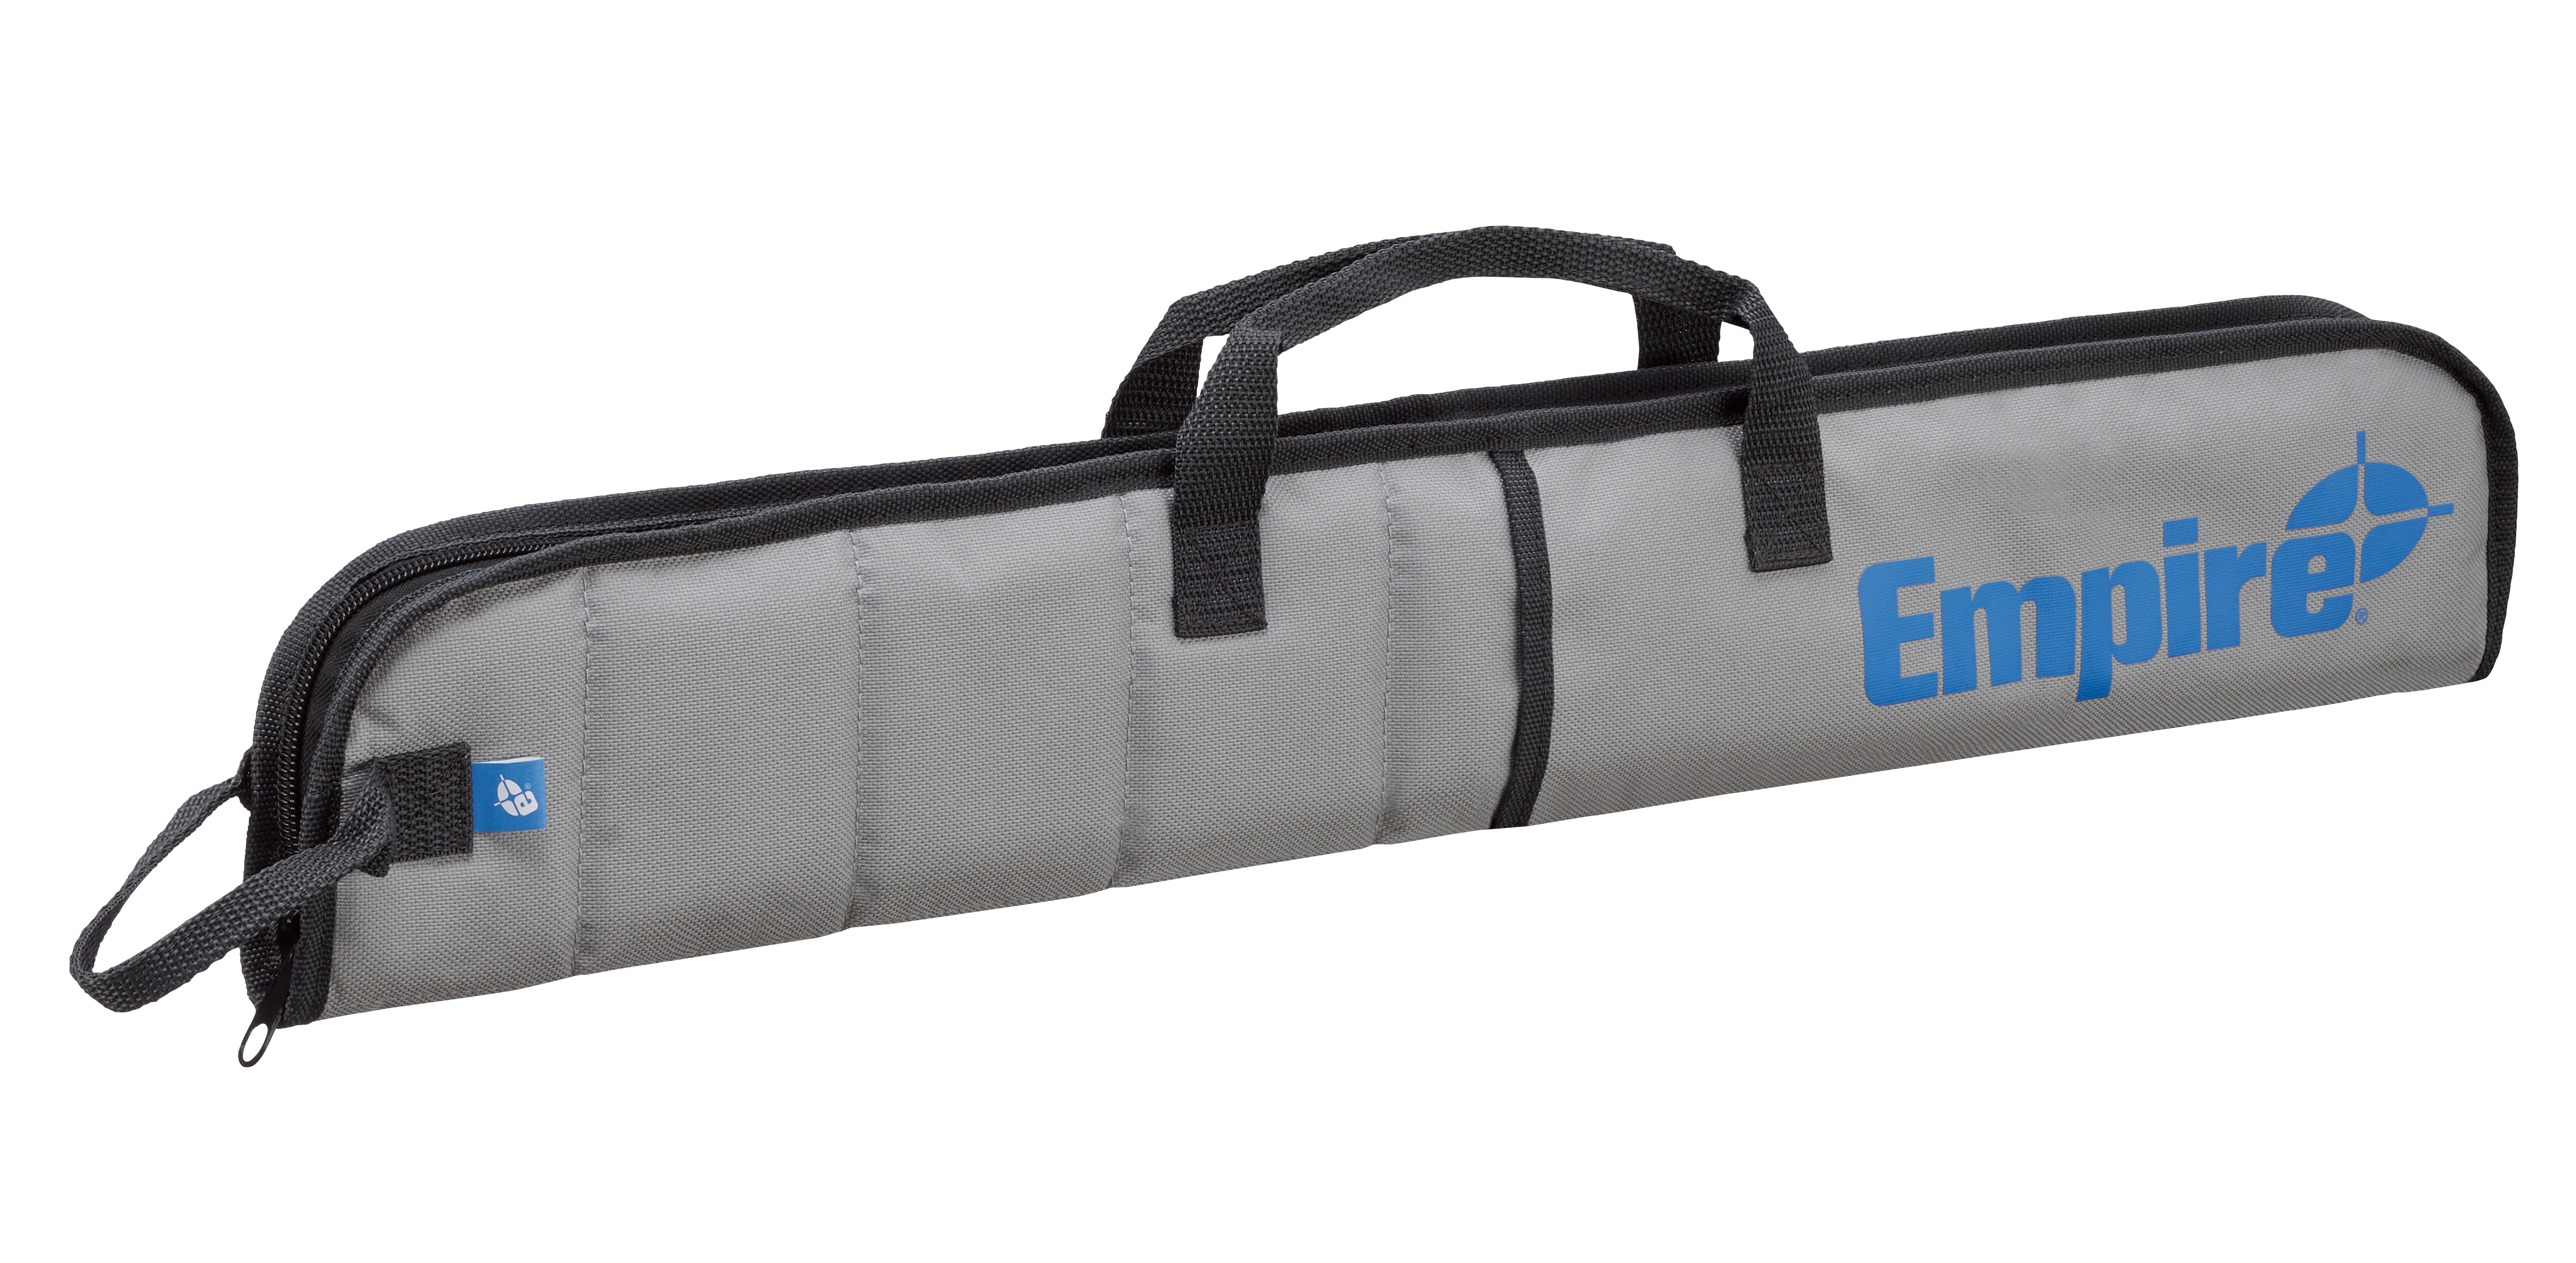 EST024 045242500451 The 24 in. level case is made of a nylon material that has extra padding to protect your level. With an reinforced handle and top, hang handle for easy transport and storing. There are two additional pockets for torpedo levels and/or miscellaneous items.